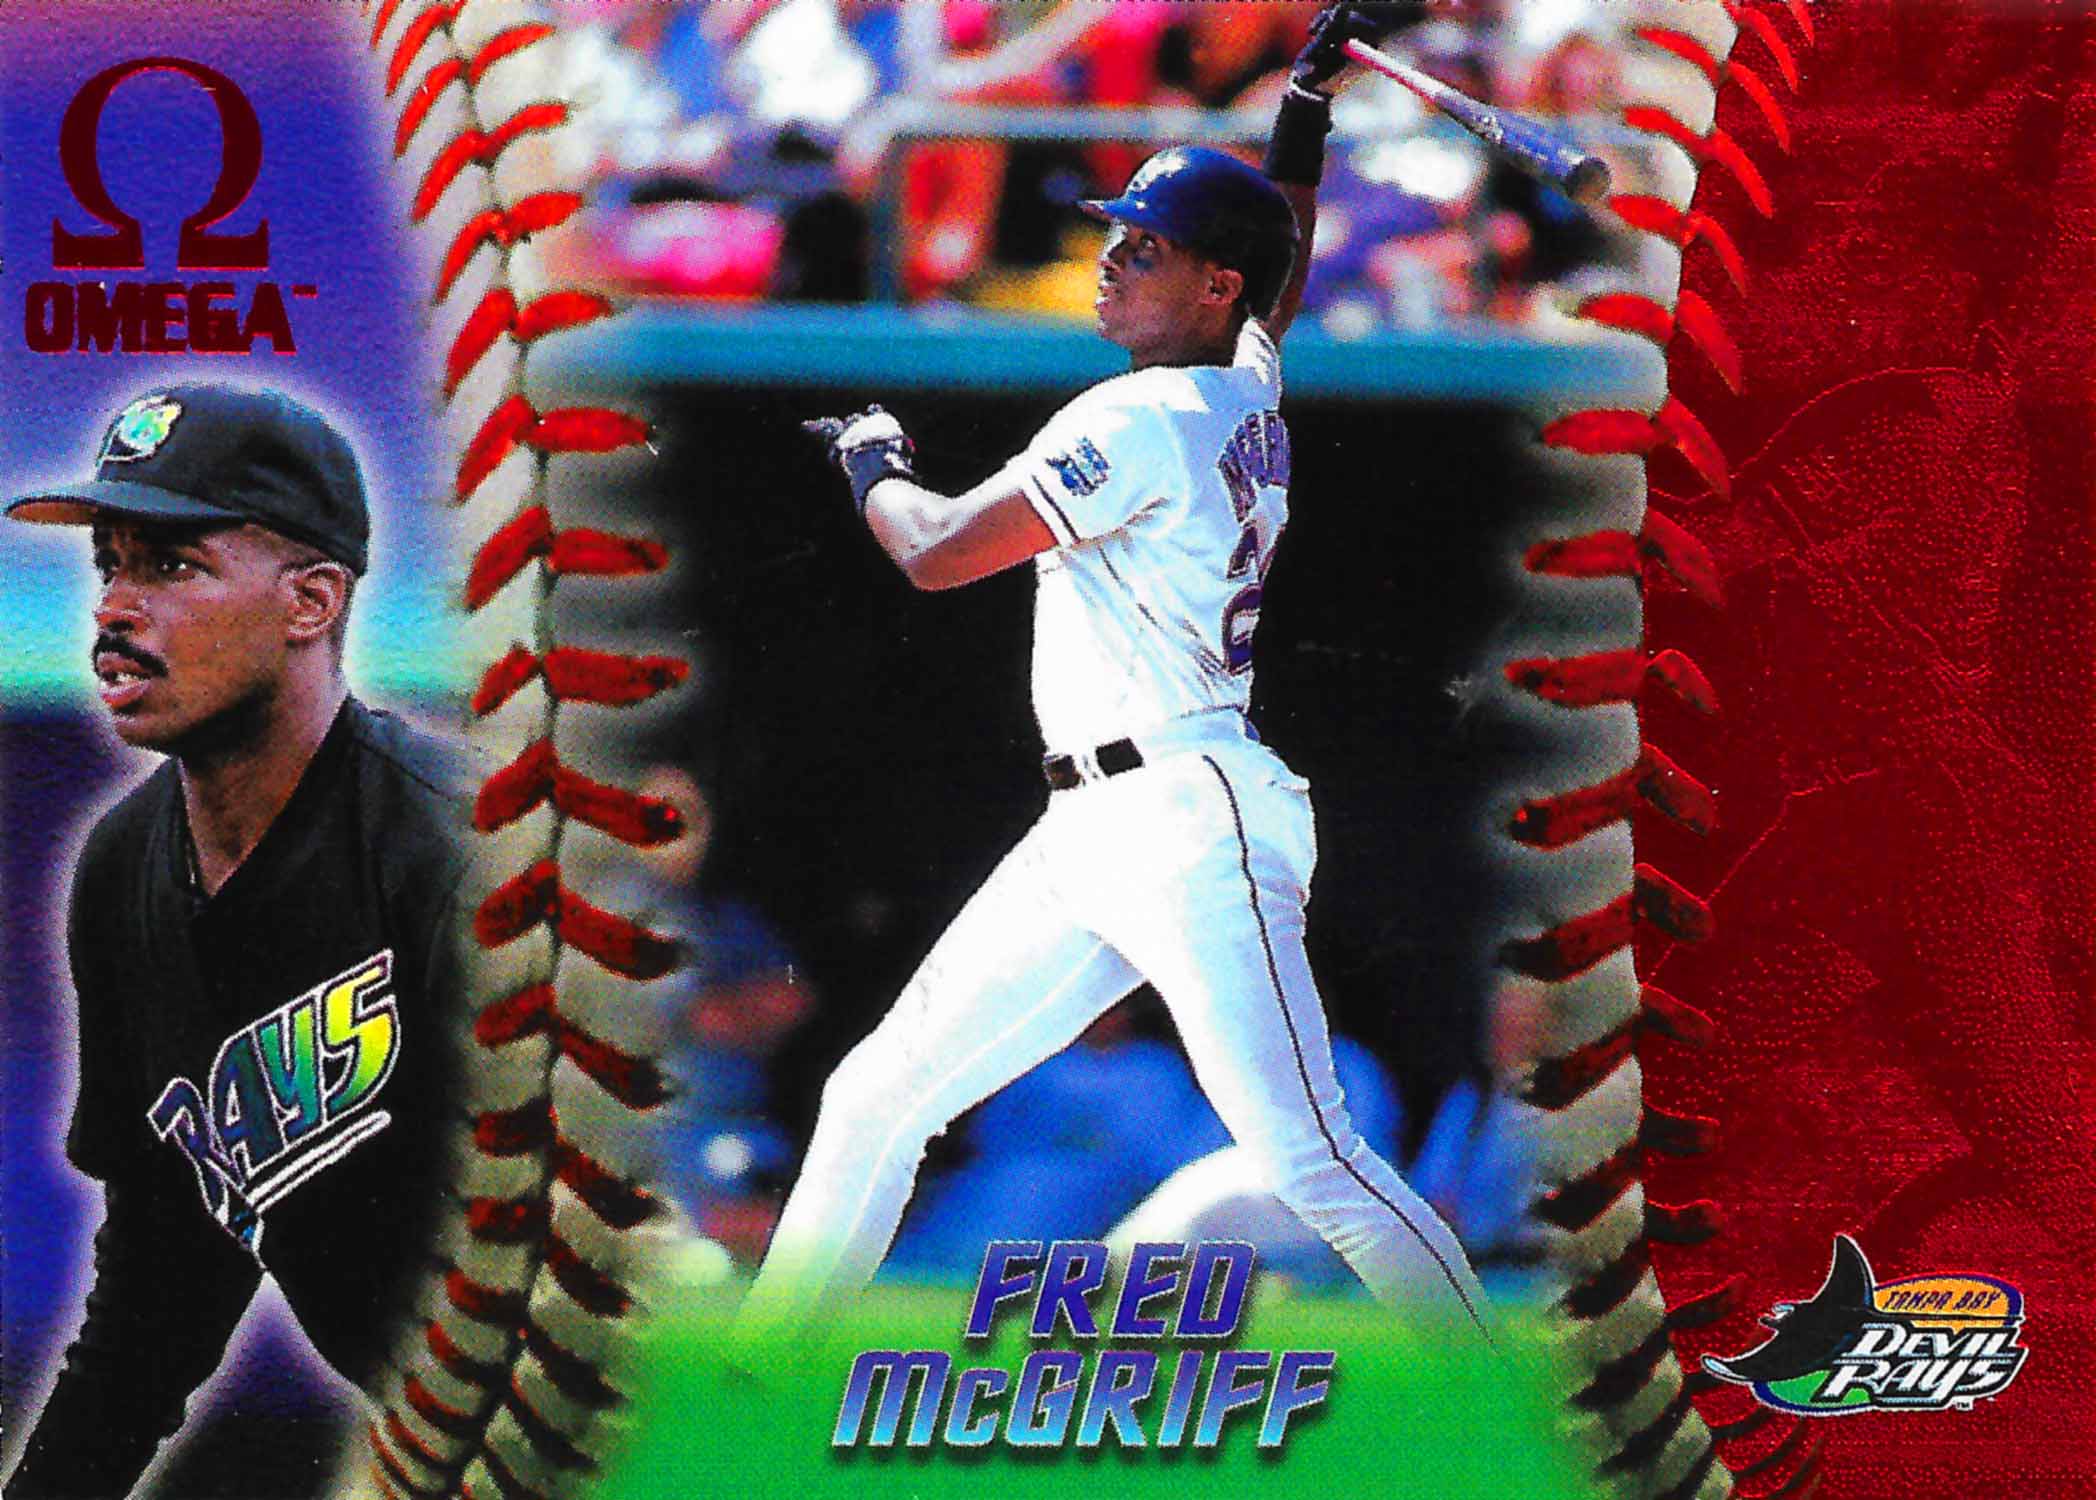 1998 Fred McGriff Game Worn Tampa Bay Devil Rays Jersey.